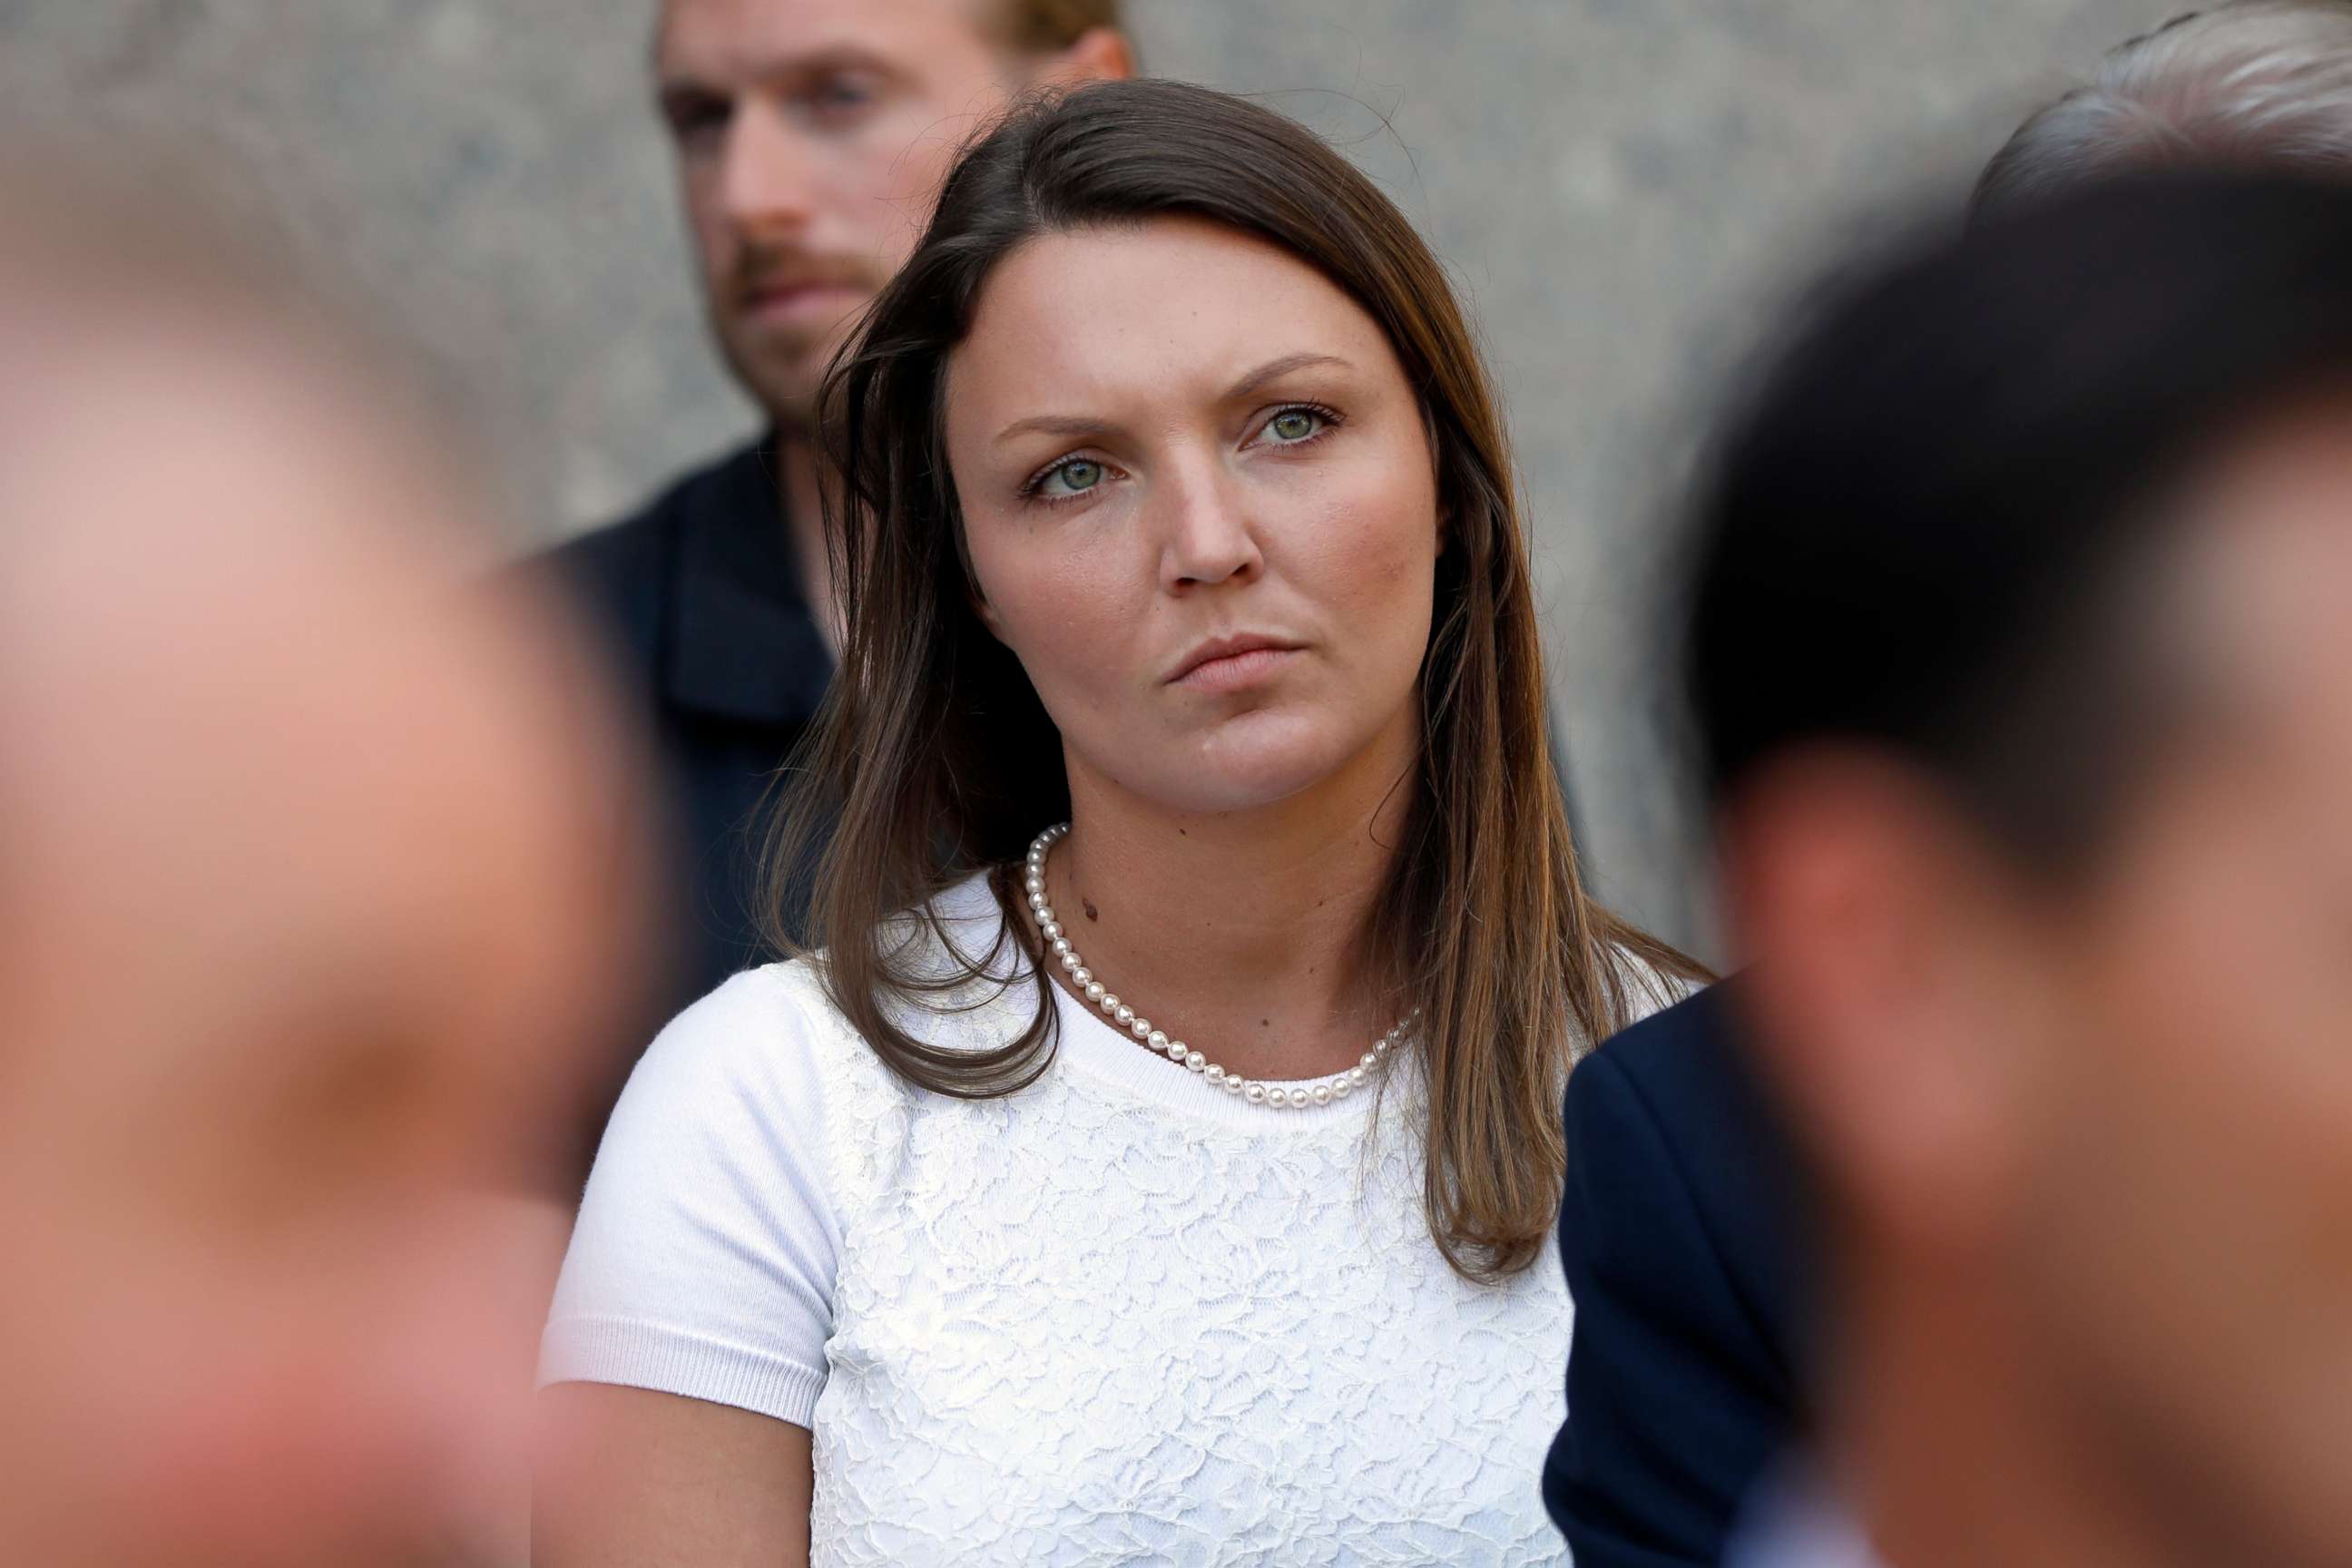 PHOTO: Courtney Wild, one of Jeffrey Epstein's accusers who spoke at his bail hearing, attends a news conference outside federal court, in N.Y., July 15, 2019.